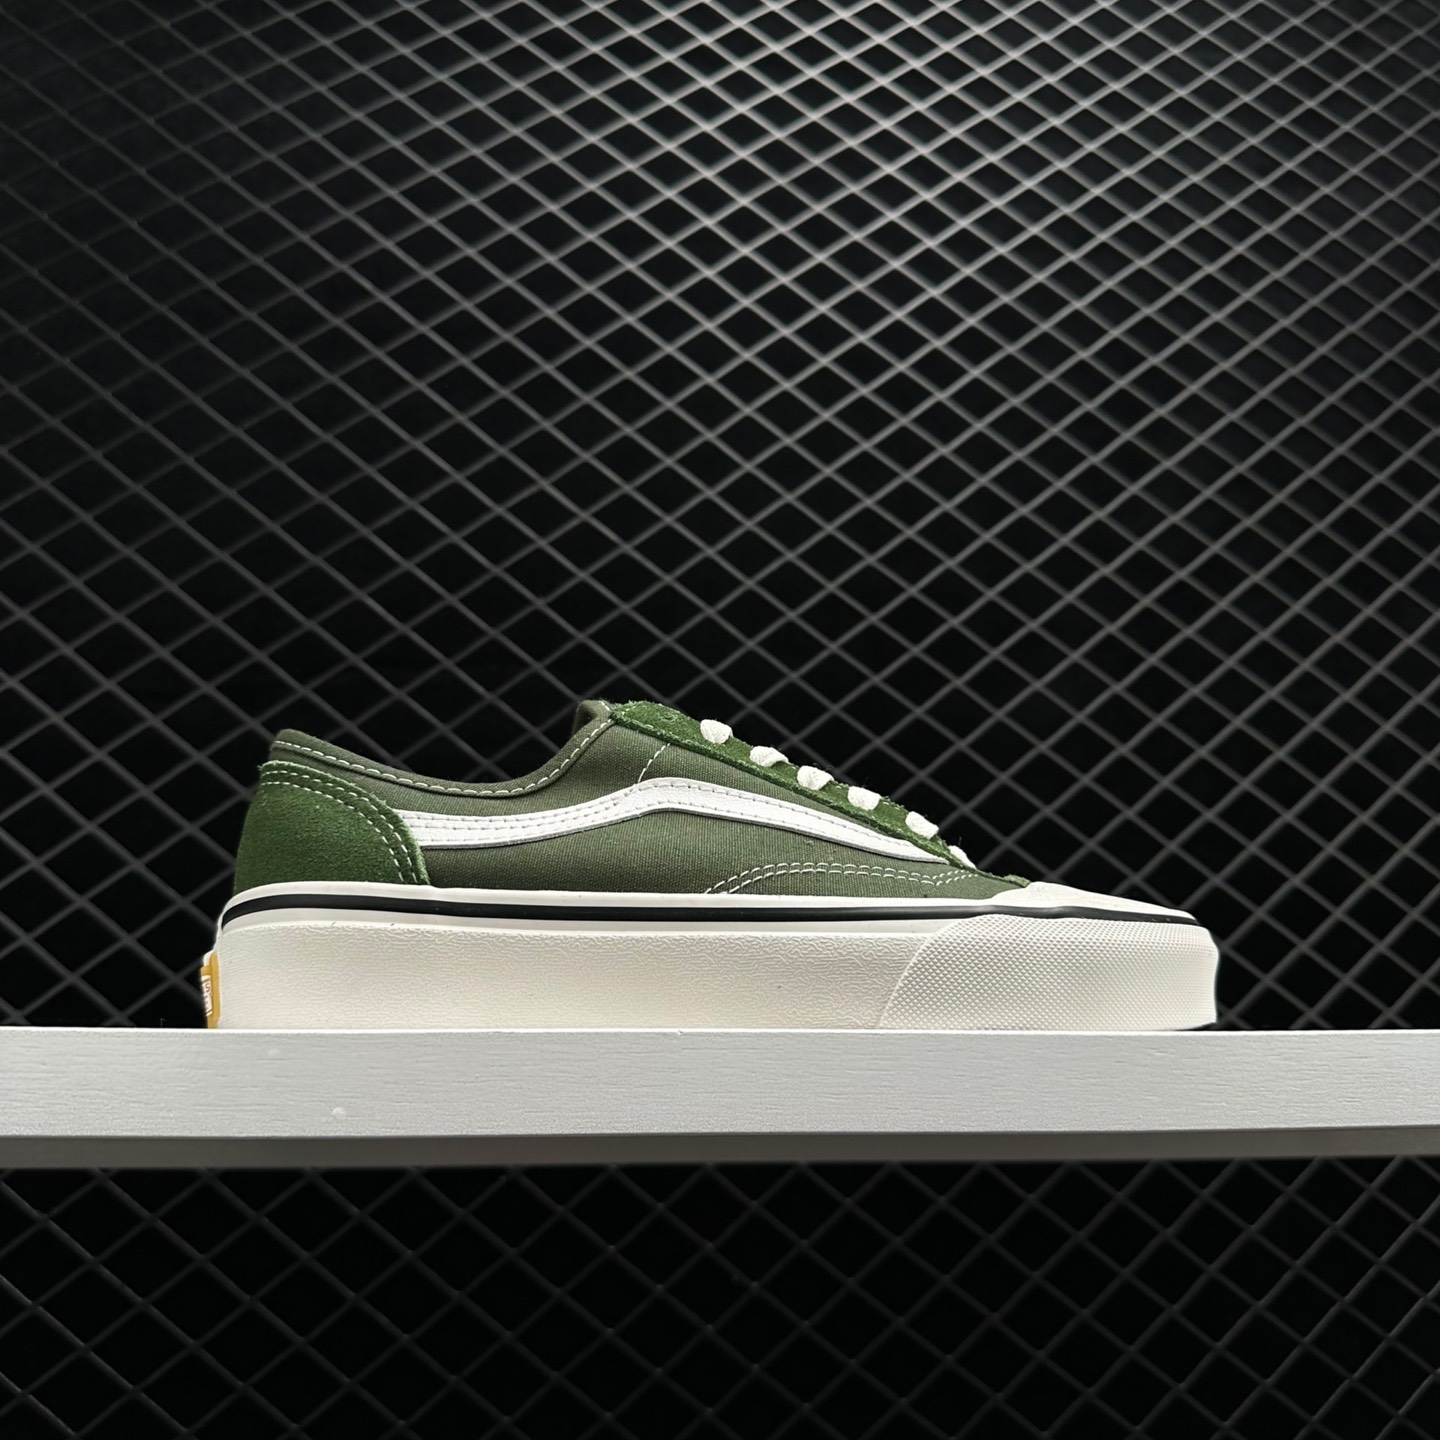 Vans Style 36 Low Top in Unisex Green – Updated Casual Skate Shoes